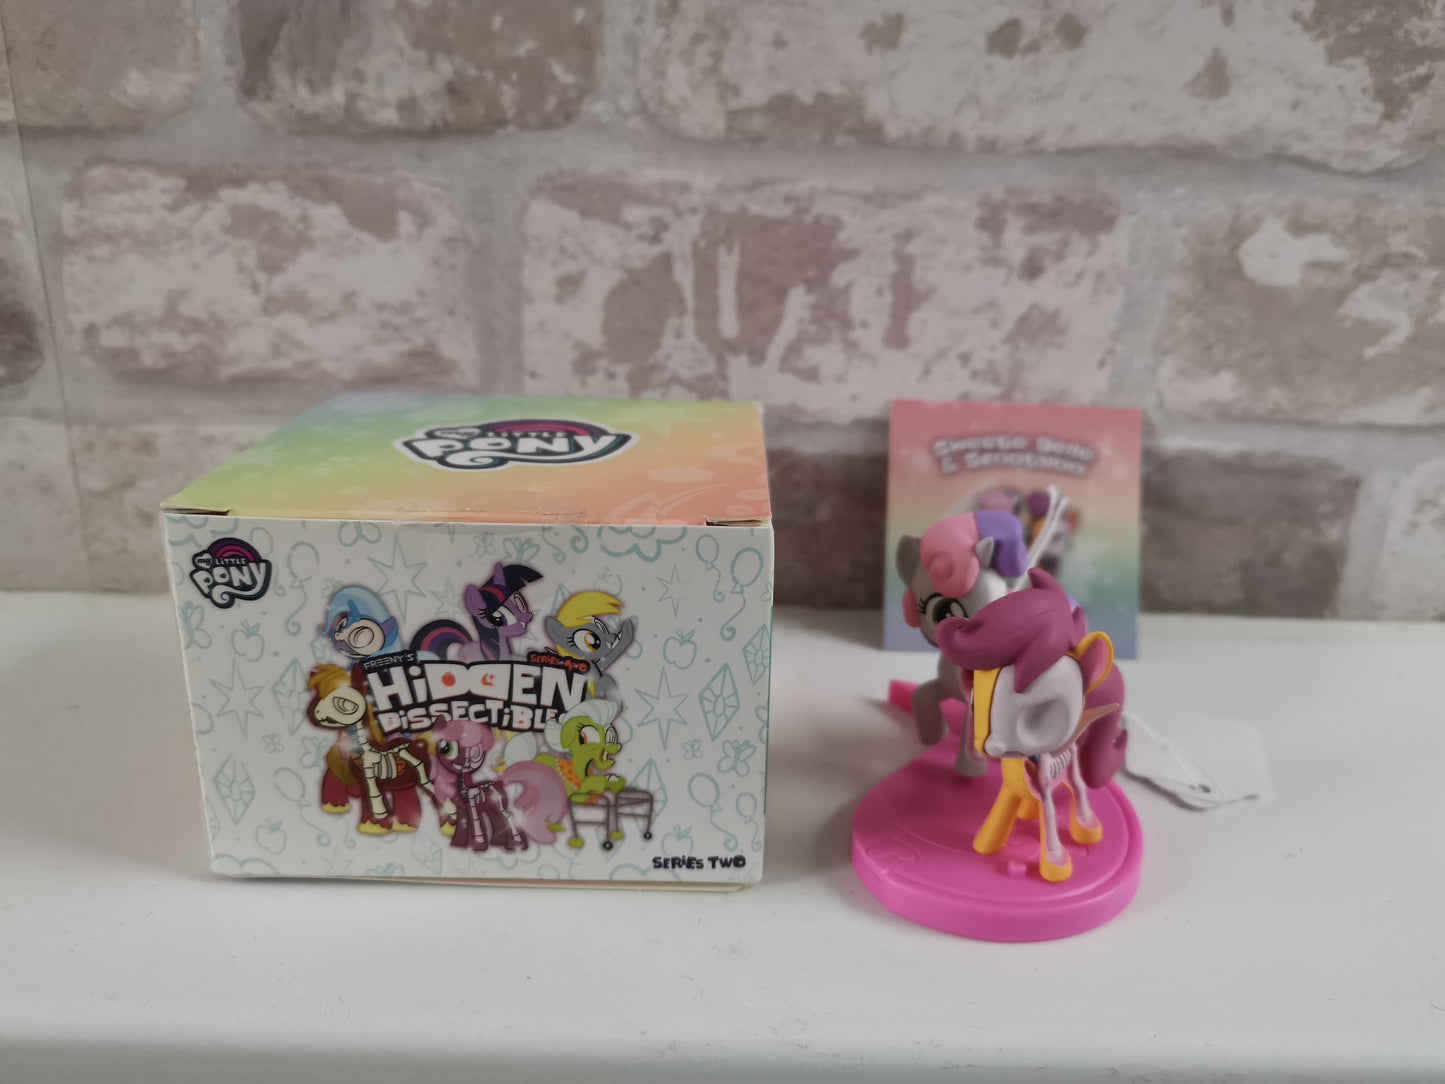 Hidden Dissectibles Series Two Chase - Sweetie Belle and Scootaloo